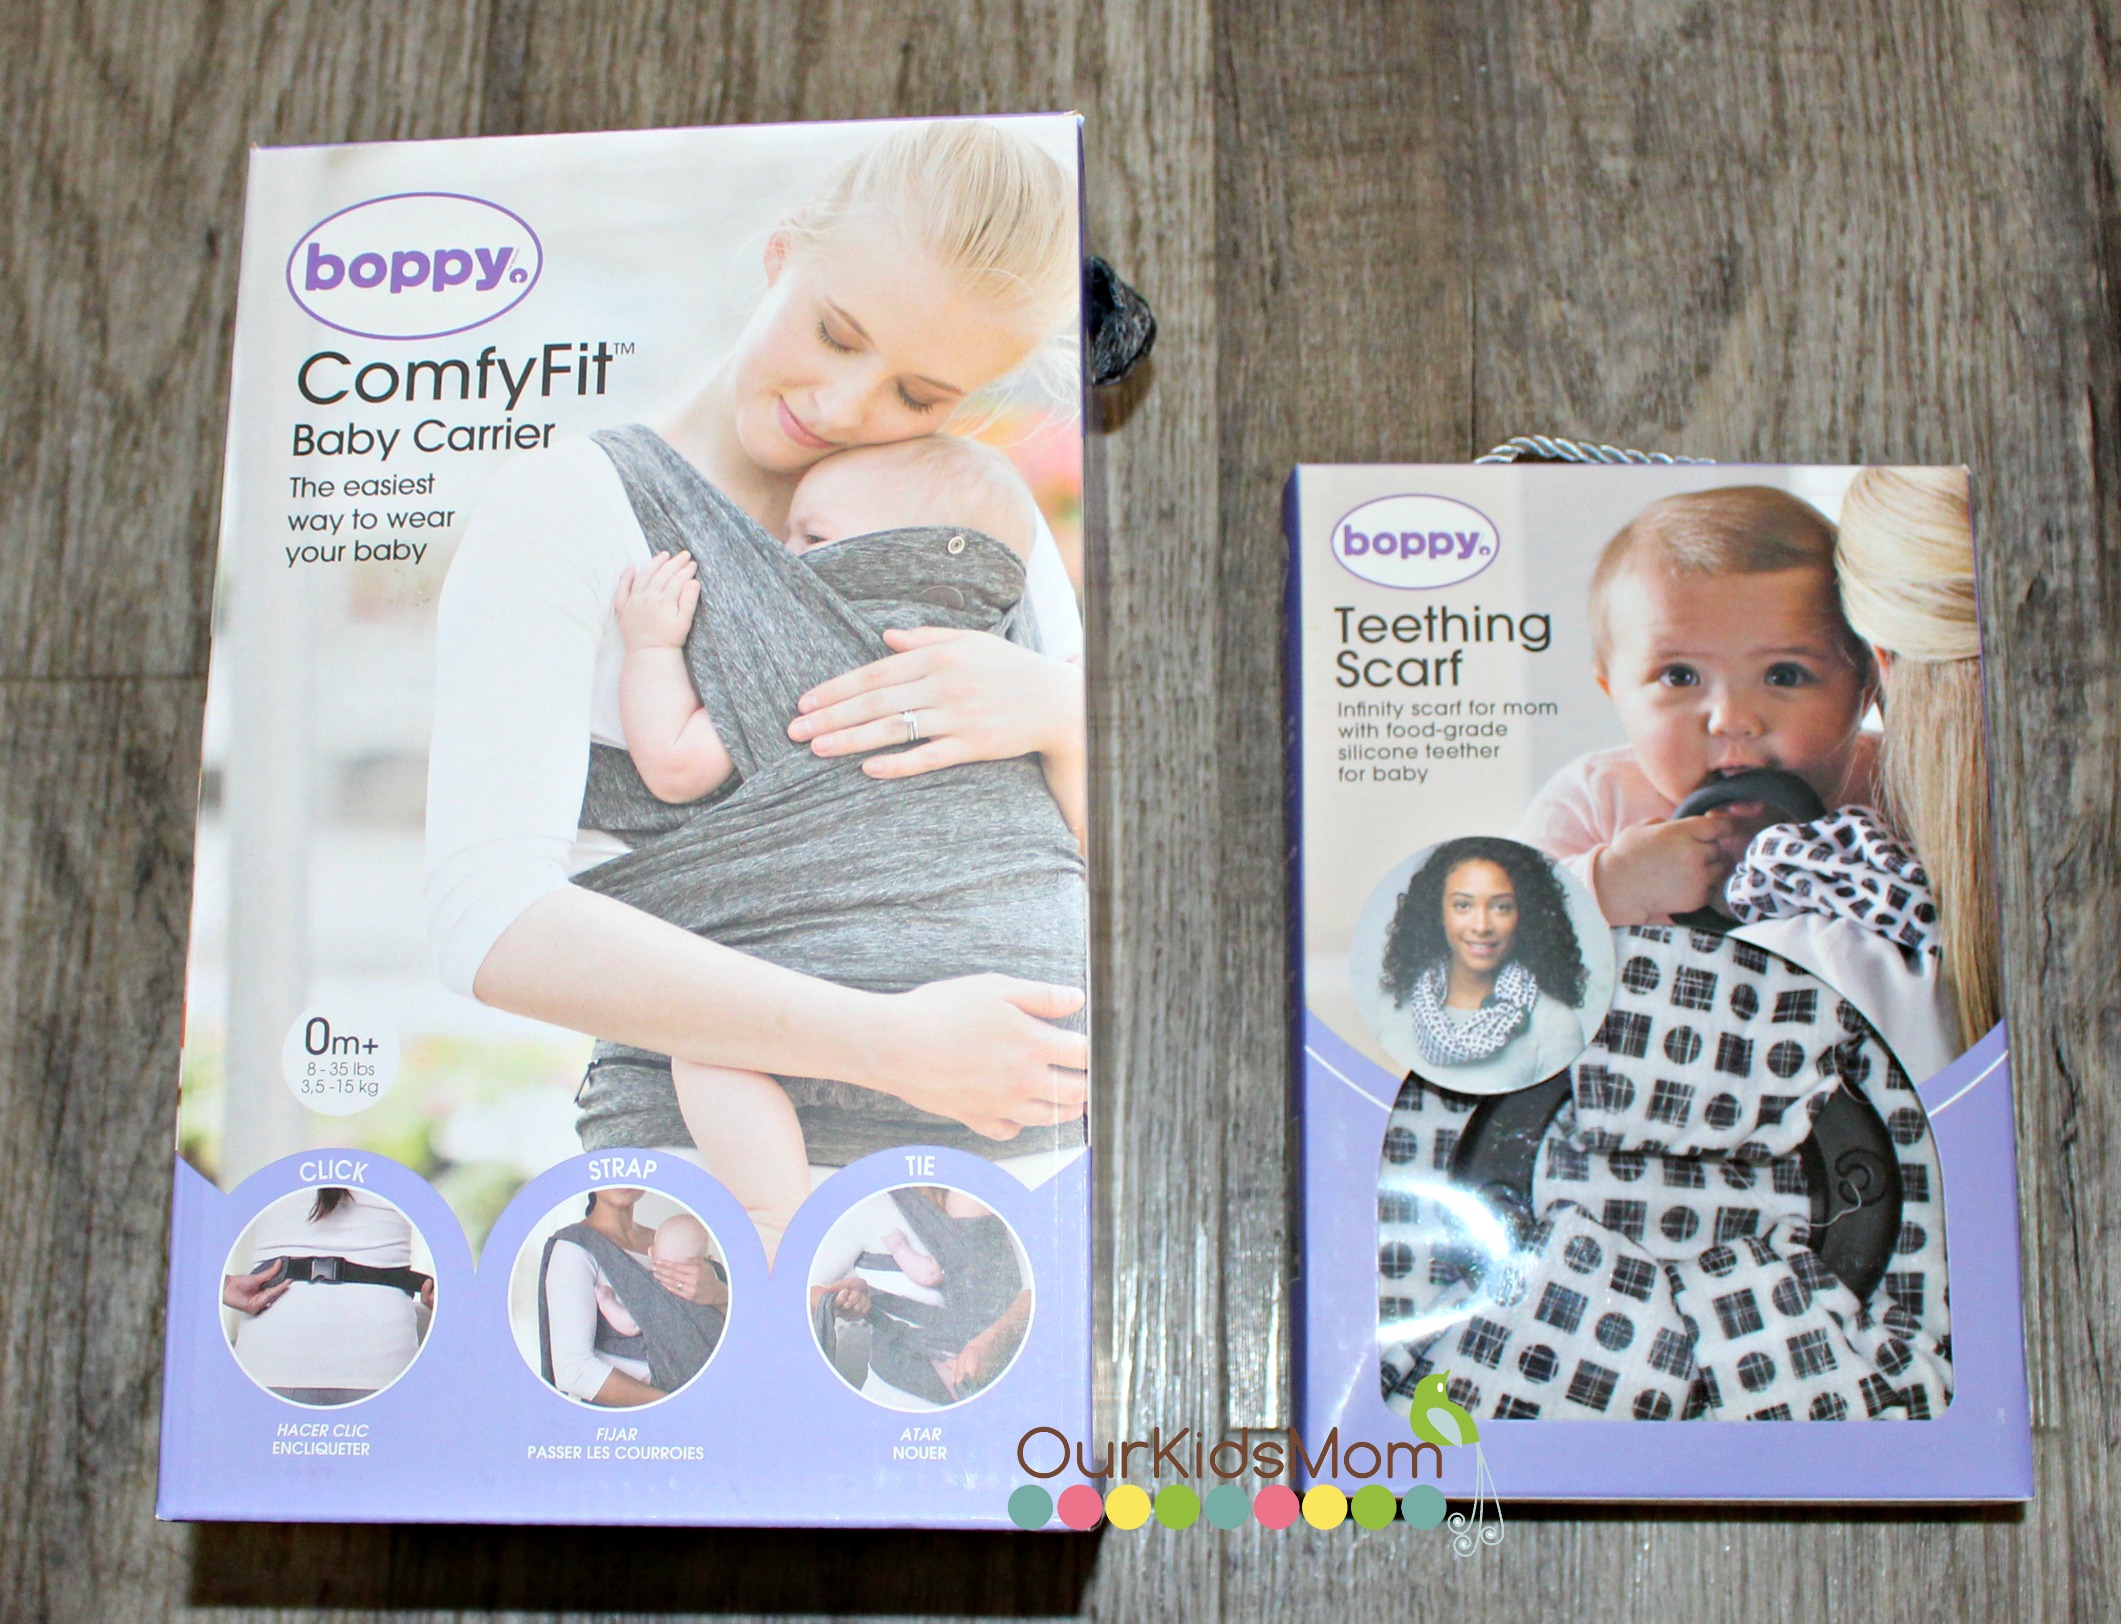 The New Boppy ComfyFit Baby Carrier